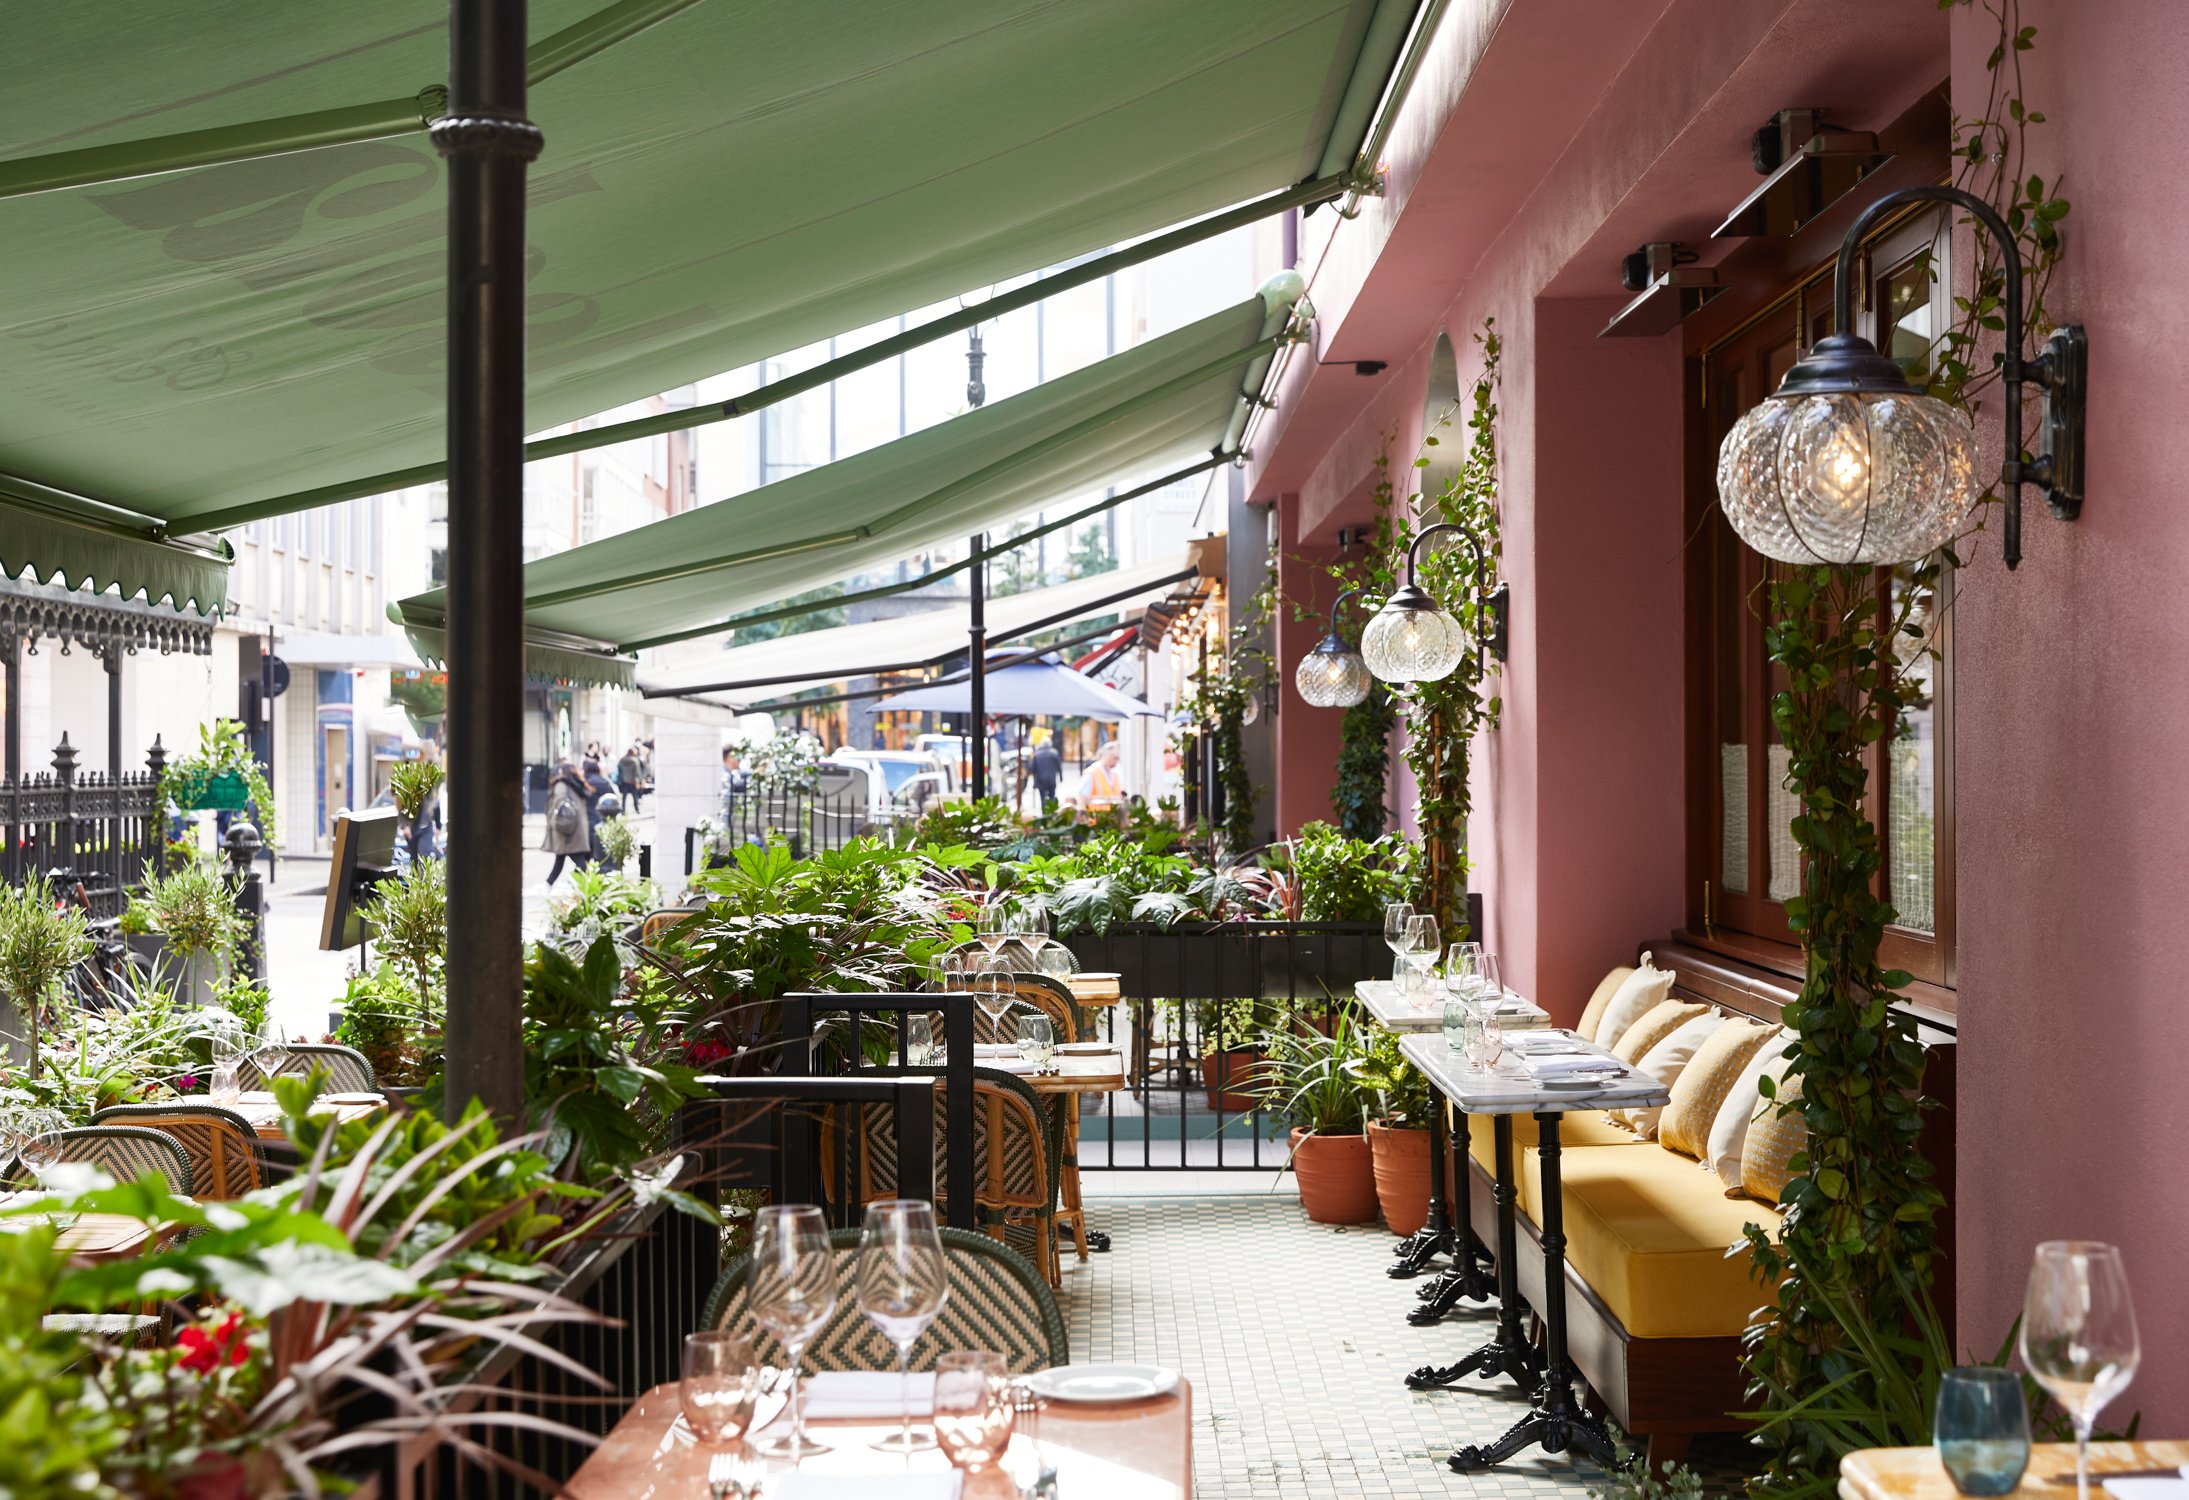 The charming terrace at Isola by San Carlo.jpg